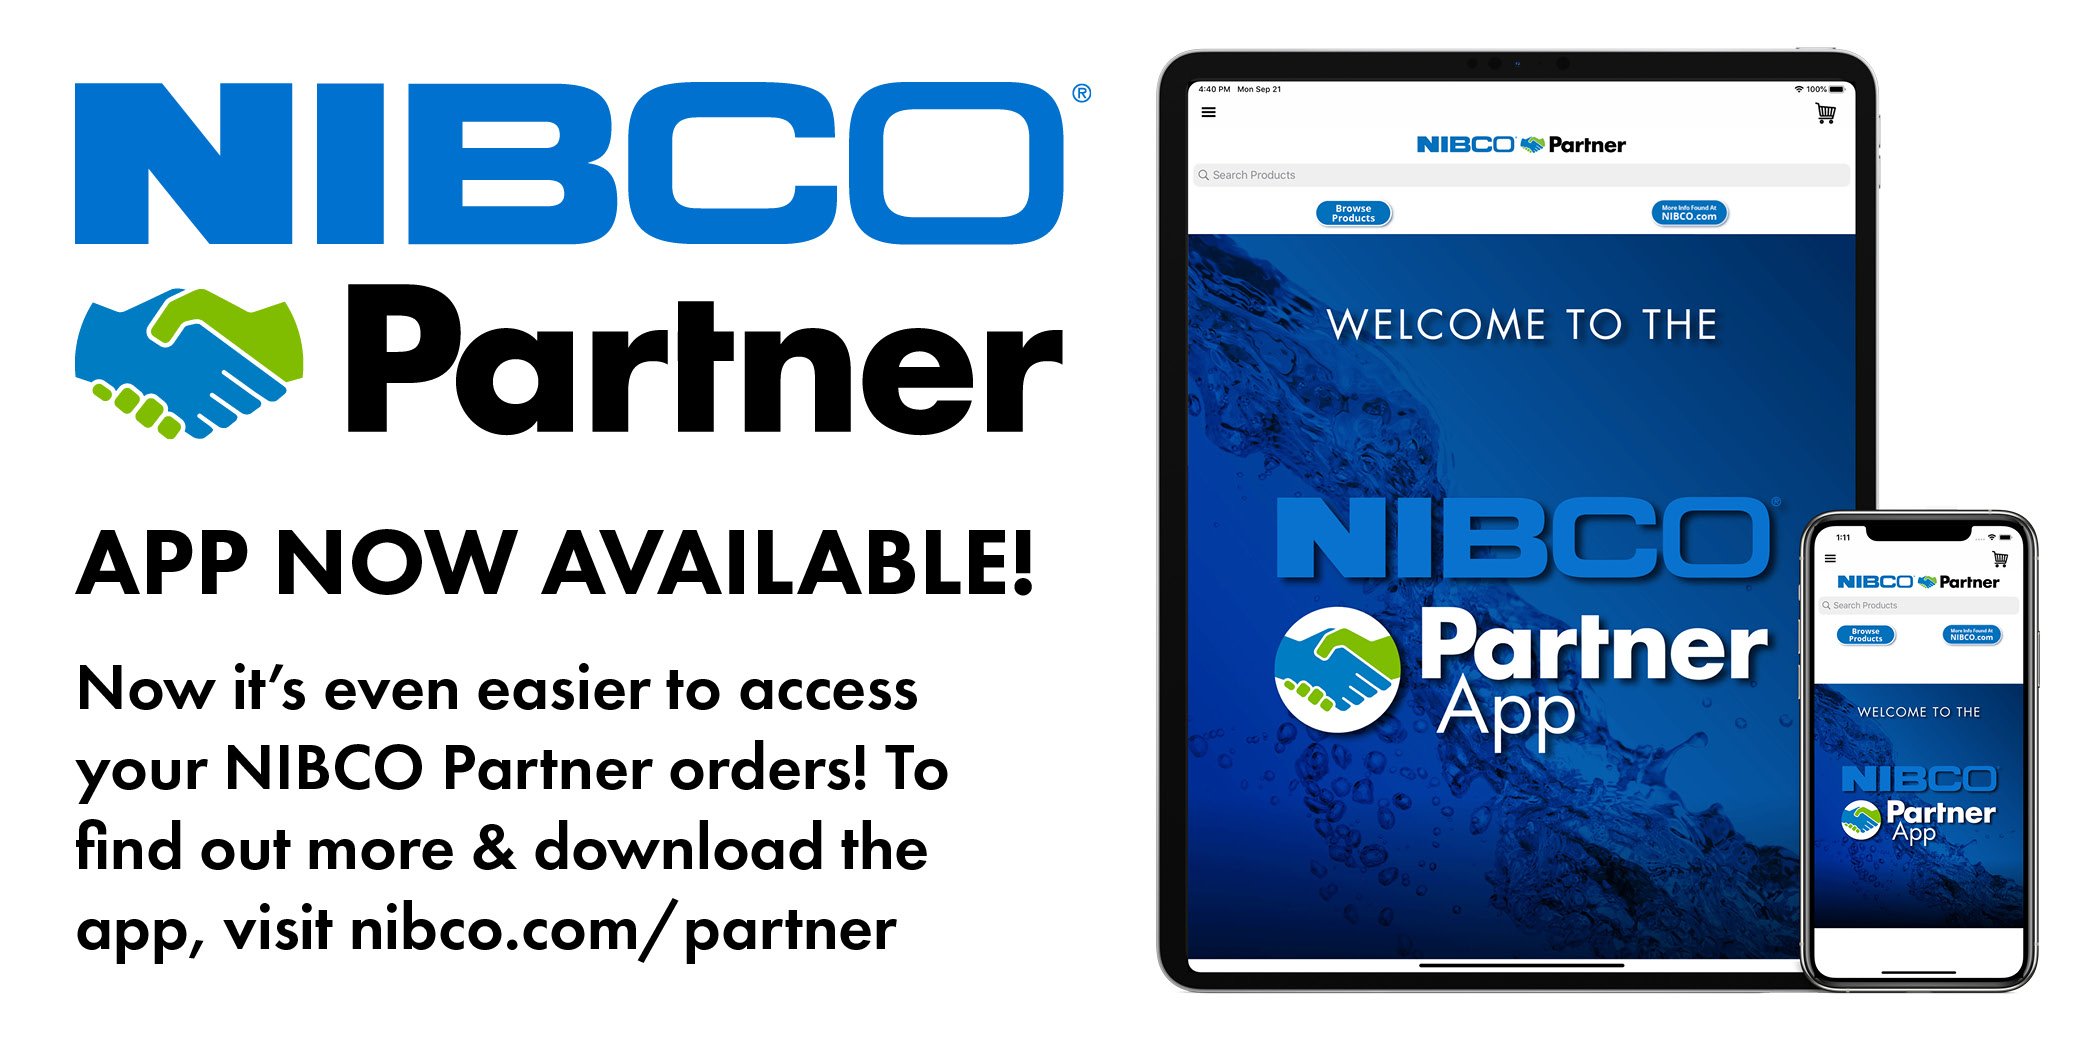 Check out the new NIBCO Partner app!